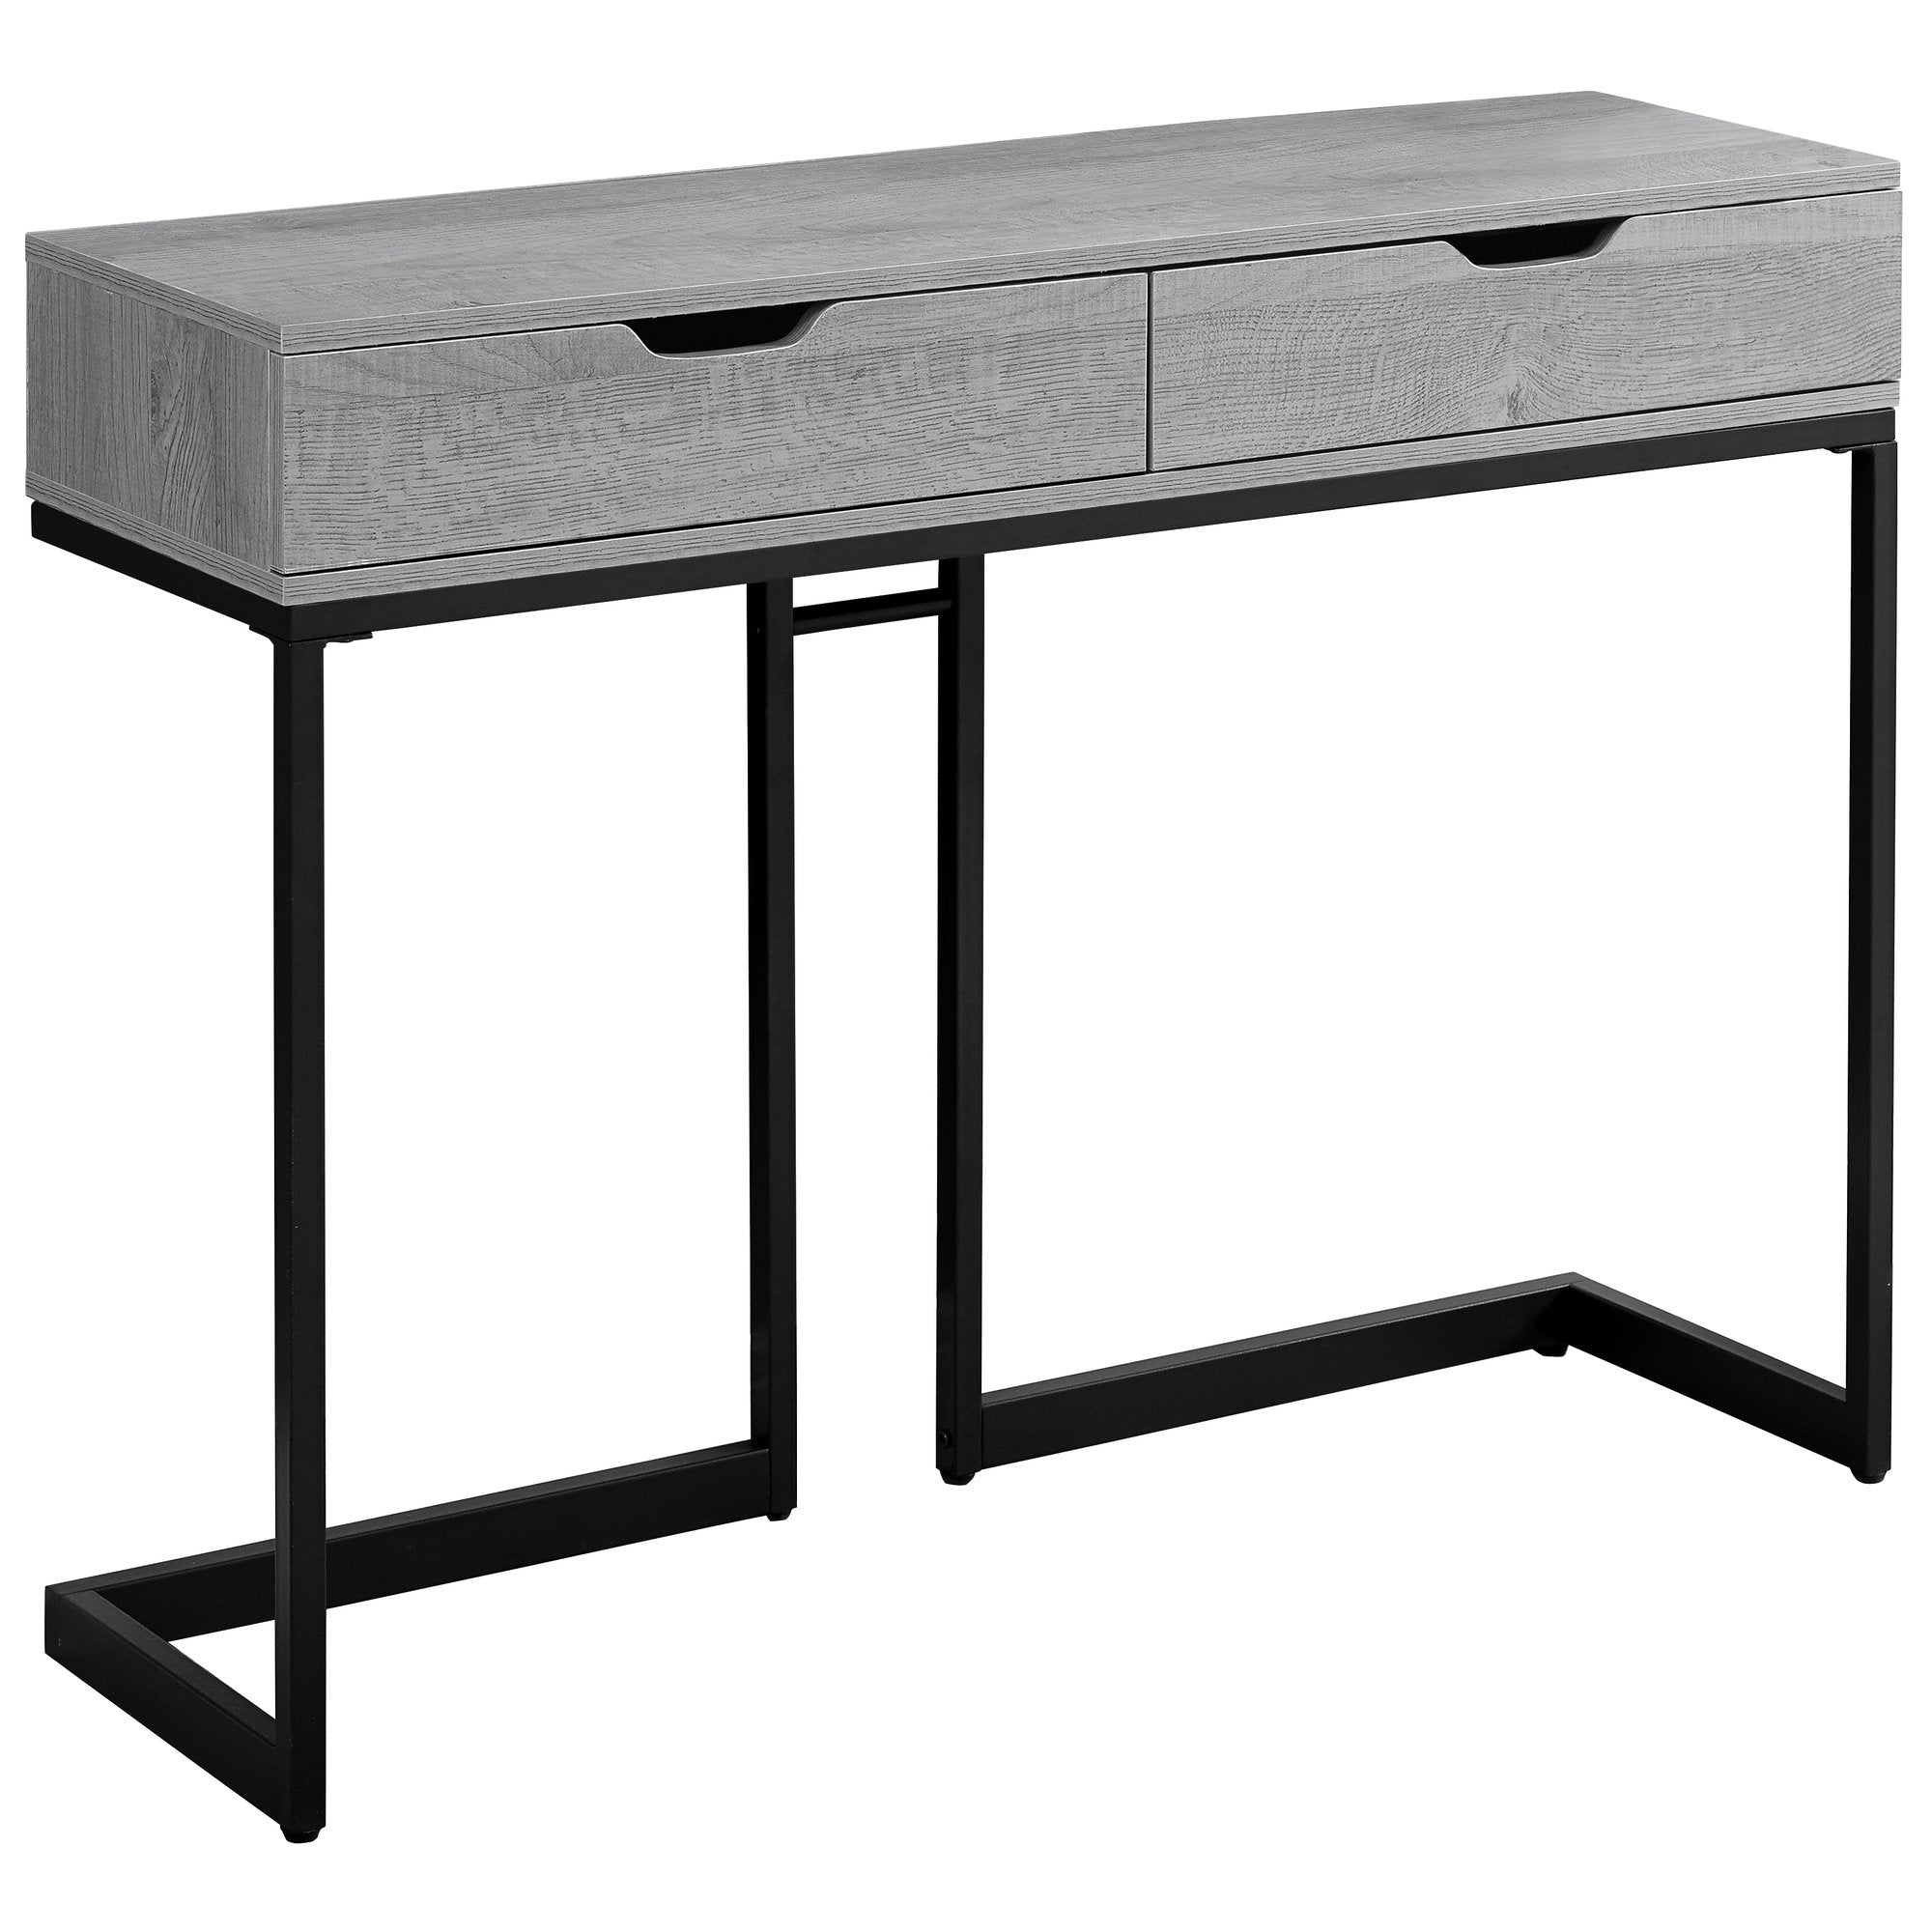 MN-203519    Accent Table, Console, Entryway, Narrow, Sofa, Living Room, Bedroom, Metal Legs, Laminate, Grey, Black, Contemporary, Modern